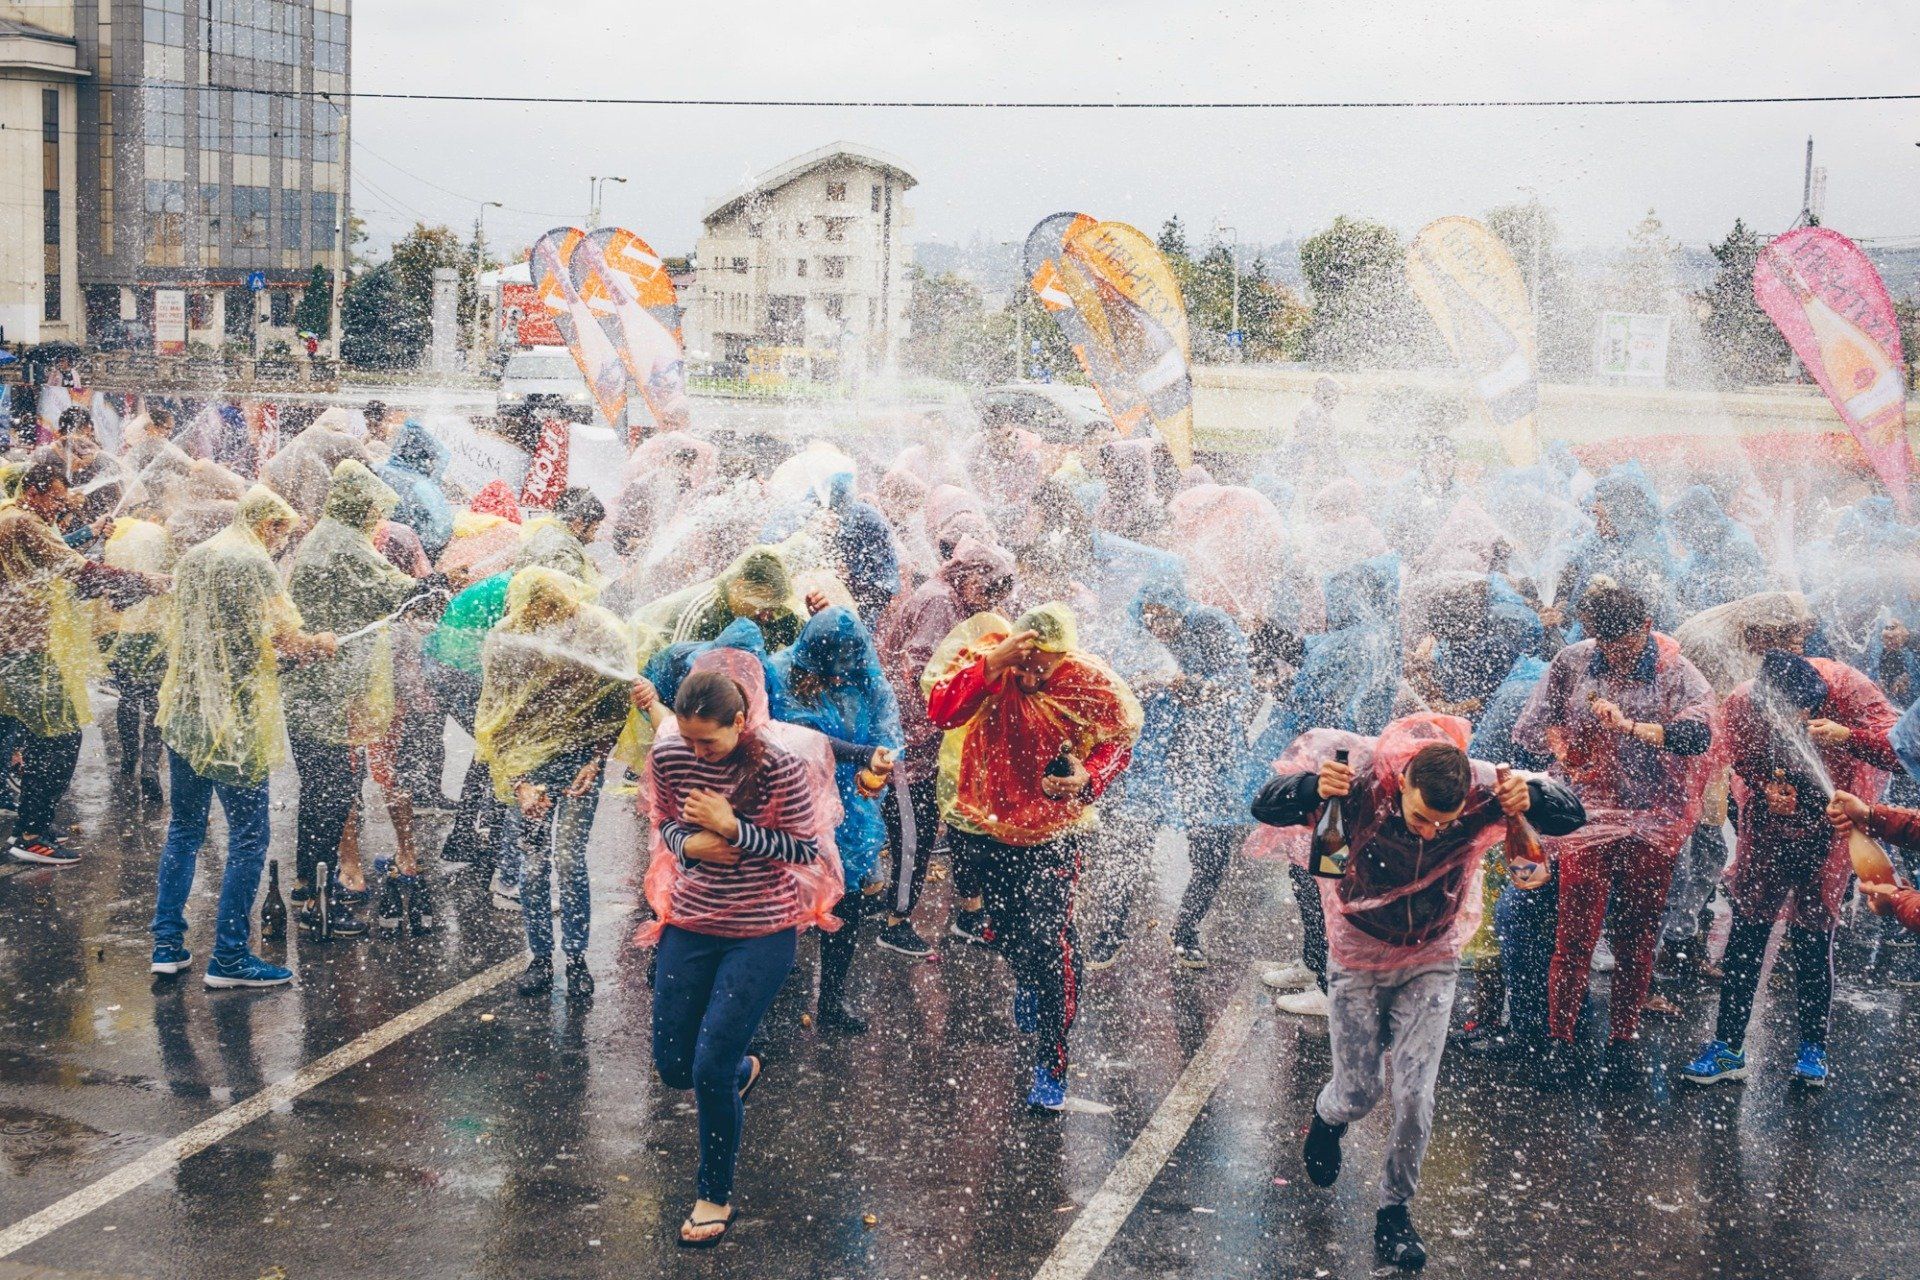 World's Largest Sparkling Wine Fight, world record by the Cotnari Winery, Romania